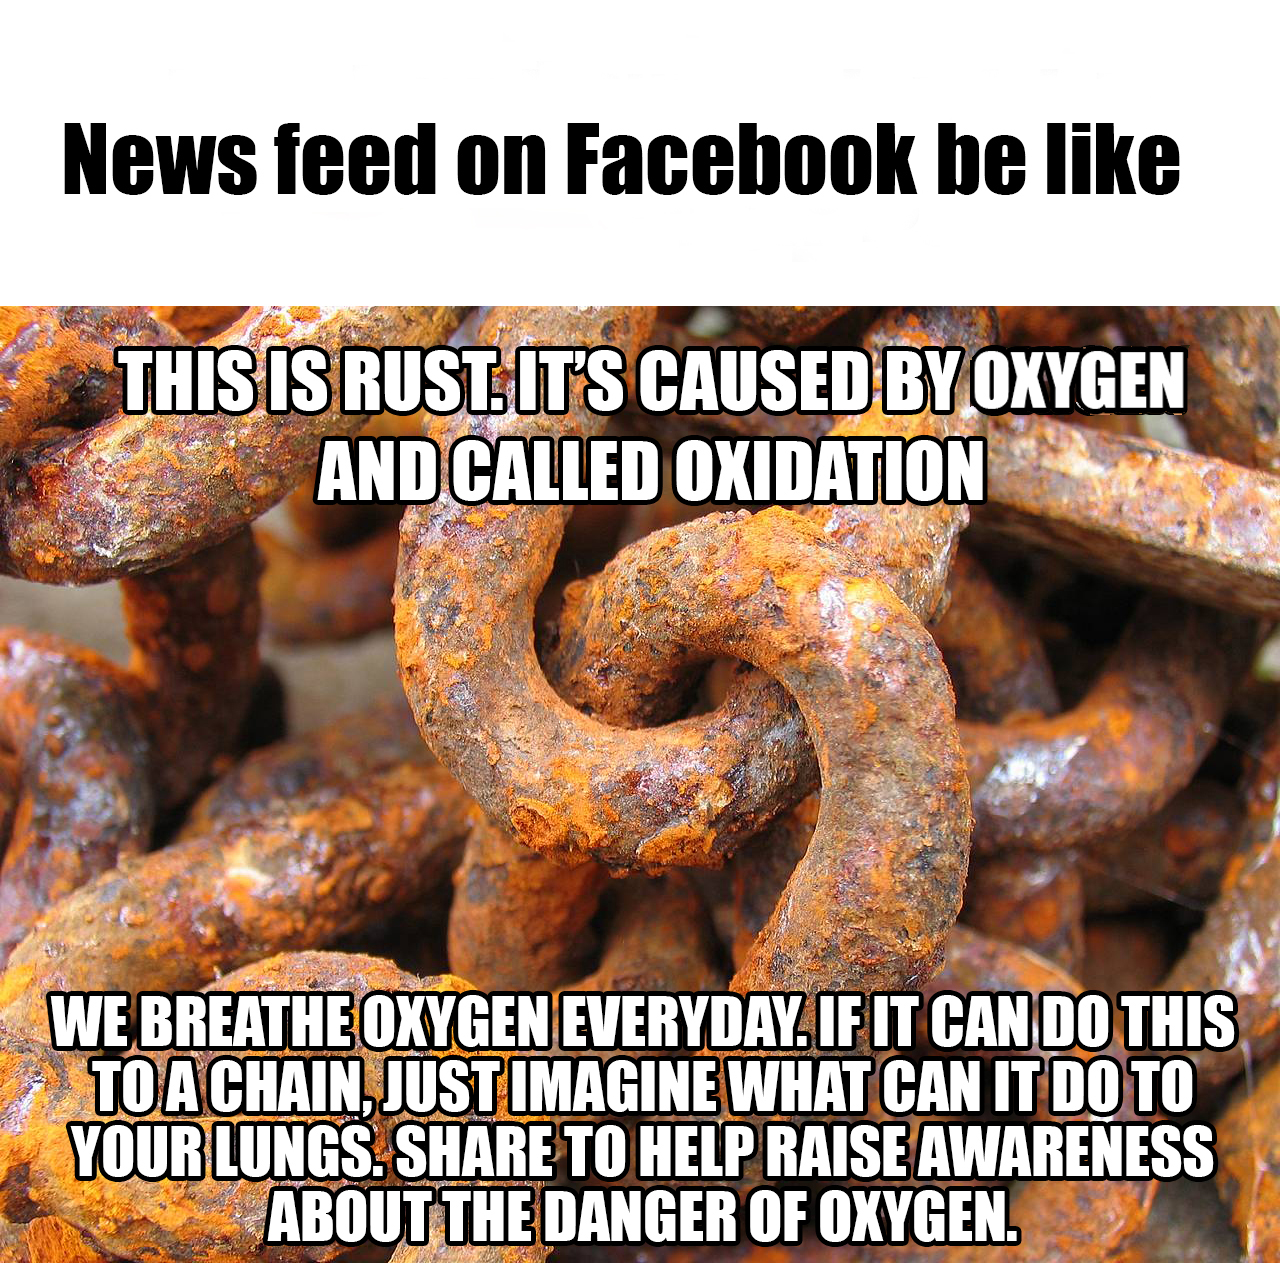 funniest pictures of 2016 - News feed on Facebook be This Is Rust It'S Caused By Oxygen And Called Oxidation We Breathe Oxygen Everyday. If It Can Do This To Achain Just Imagine What Can It Do To Your Lungs. To Help Raise Awareness About The Danger Of Oxy